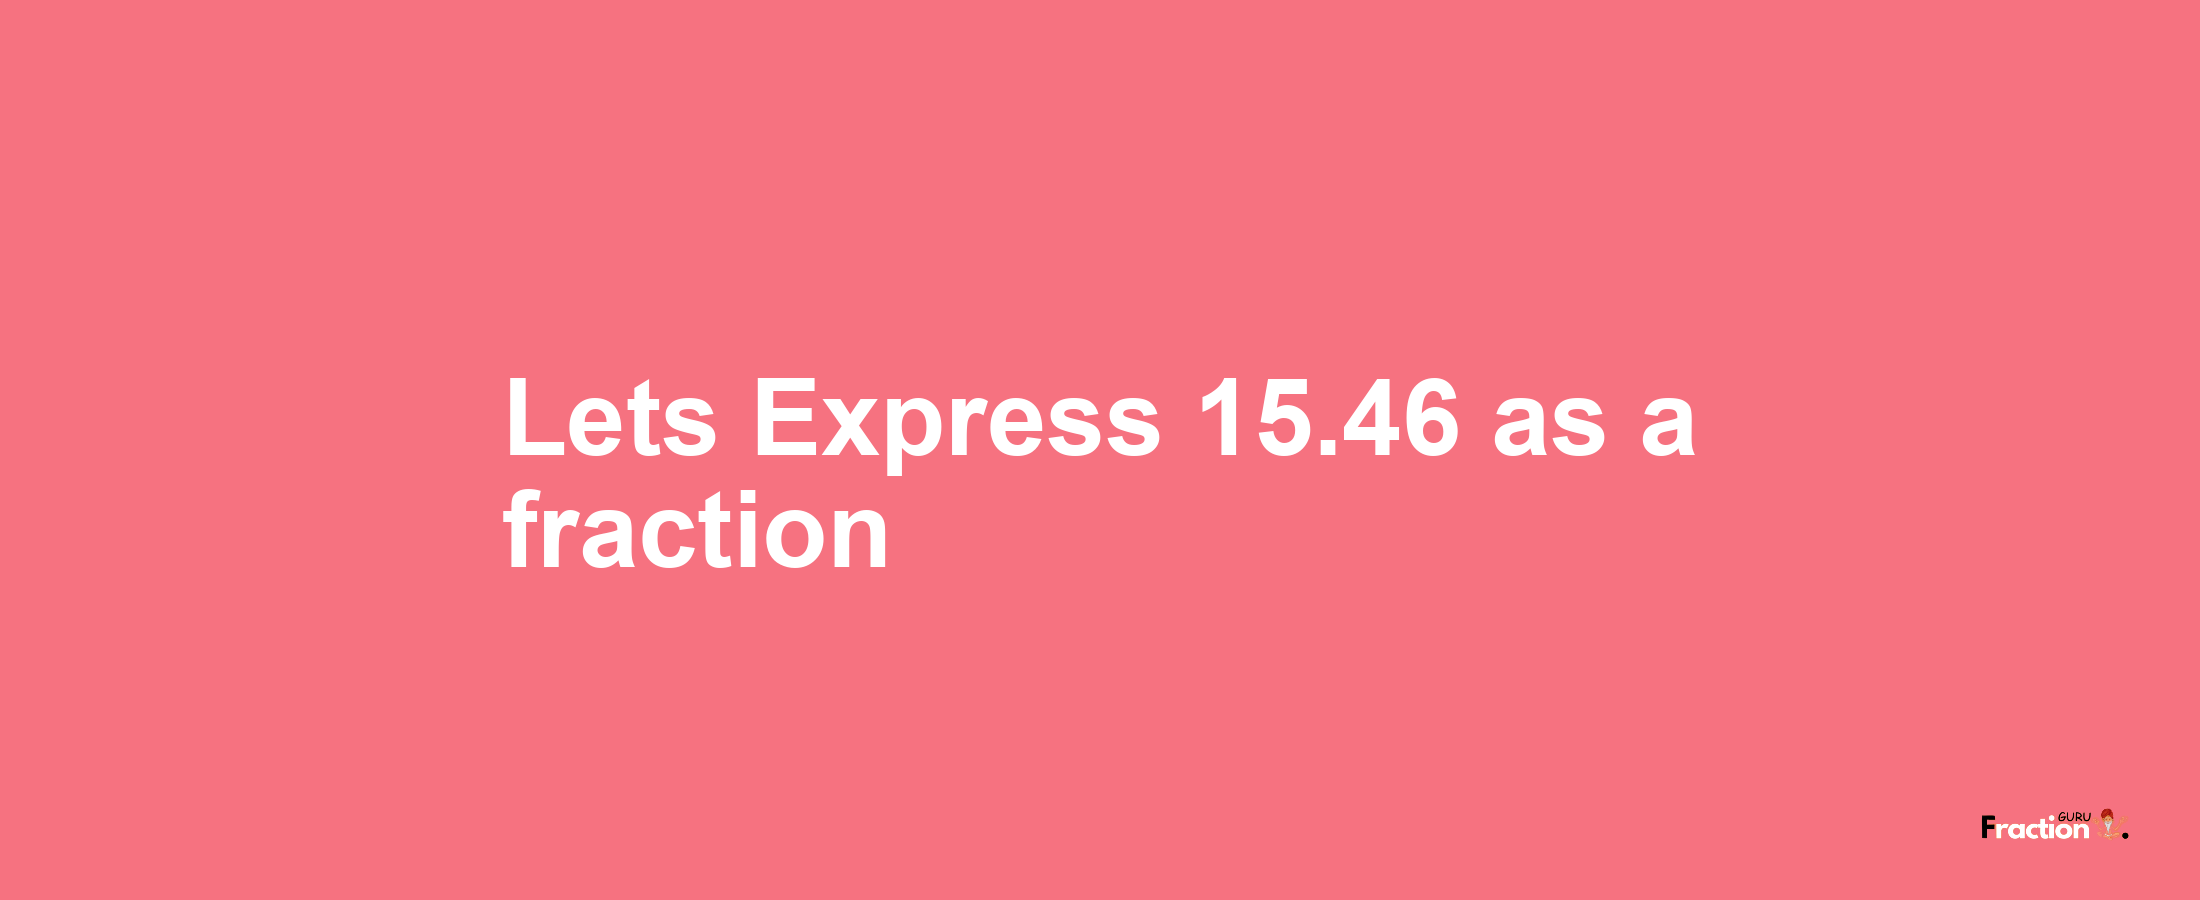 Lets Express 15.46 as afraction